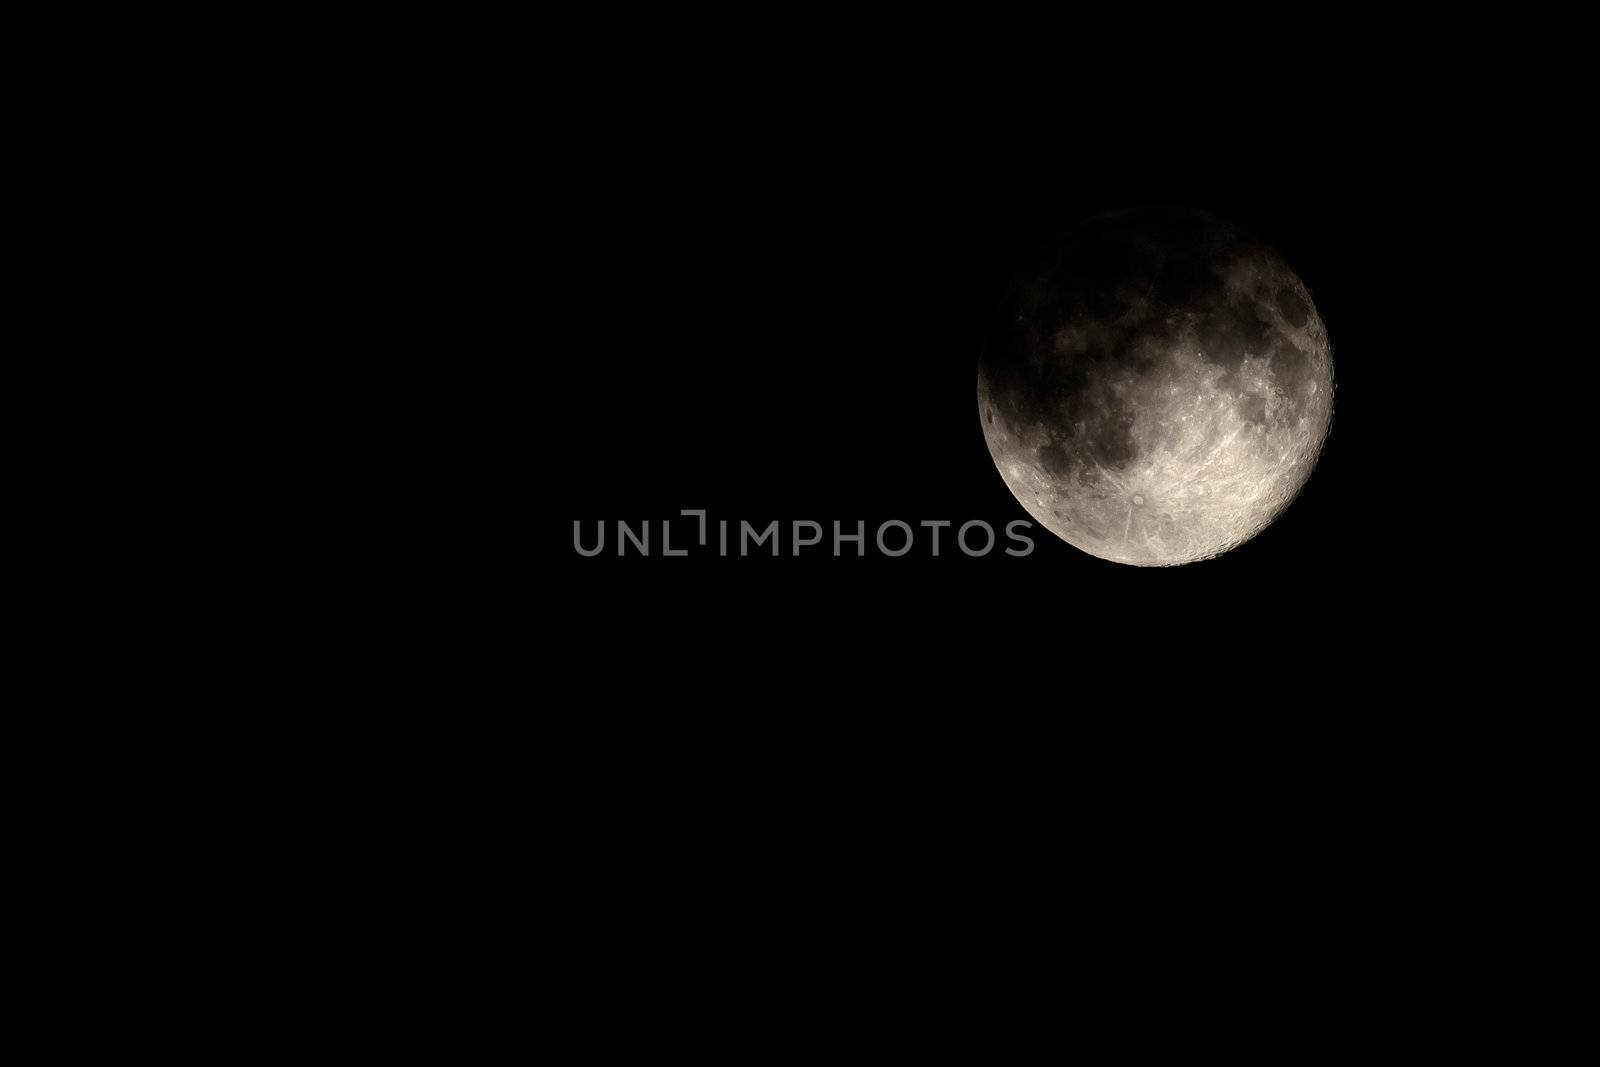 Dark Moody Cloud Covered Full Moon Waning by One Day by scheriton